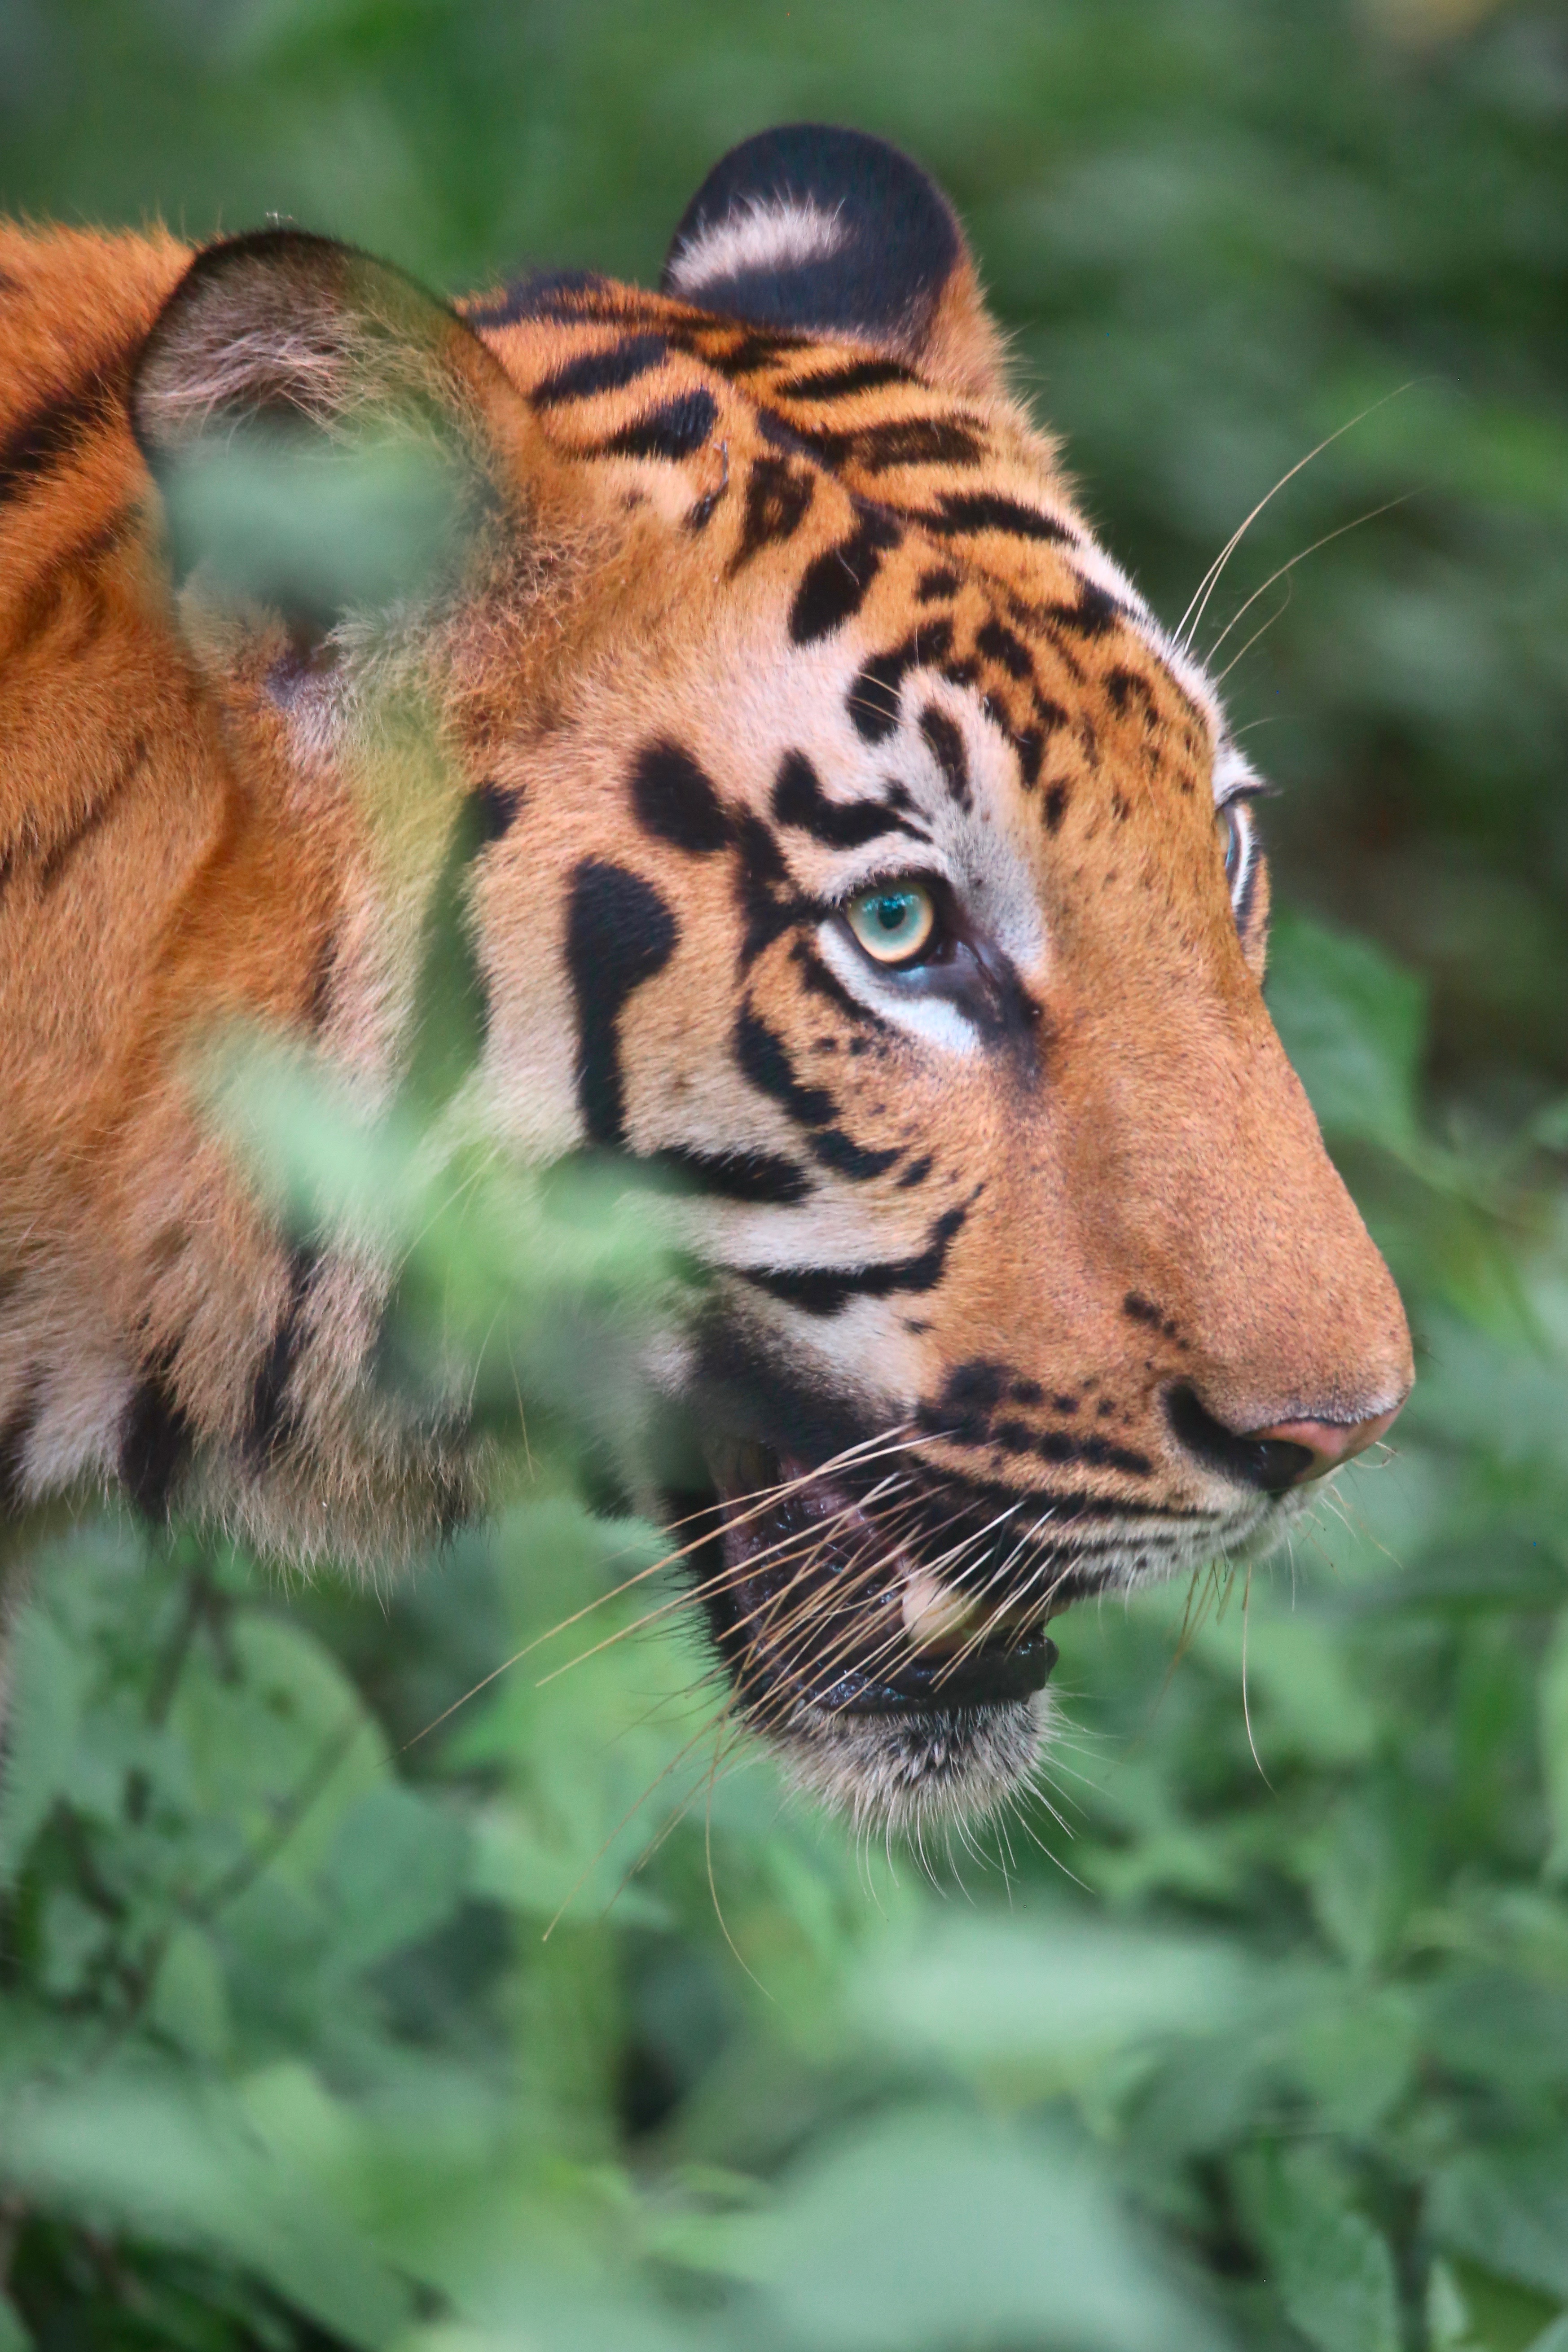 The Majestic Bengal Tiger Is an Endangered Species